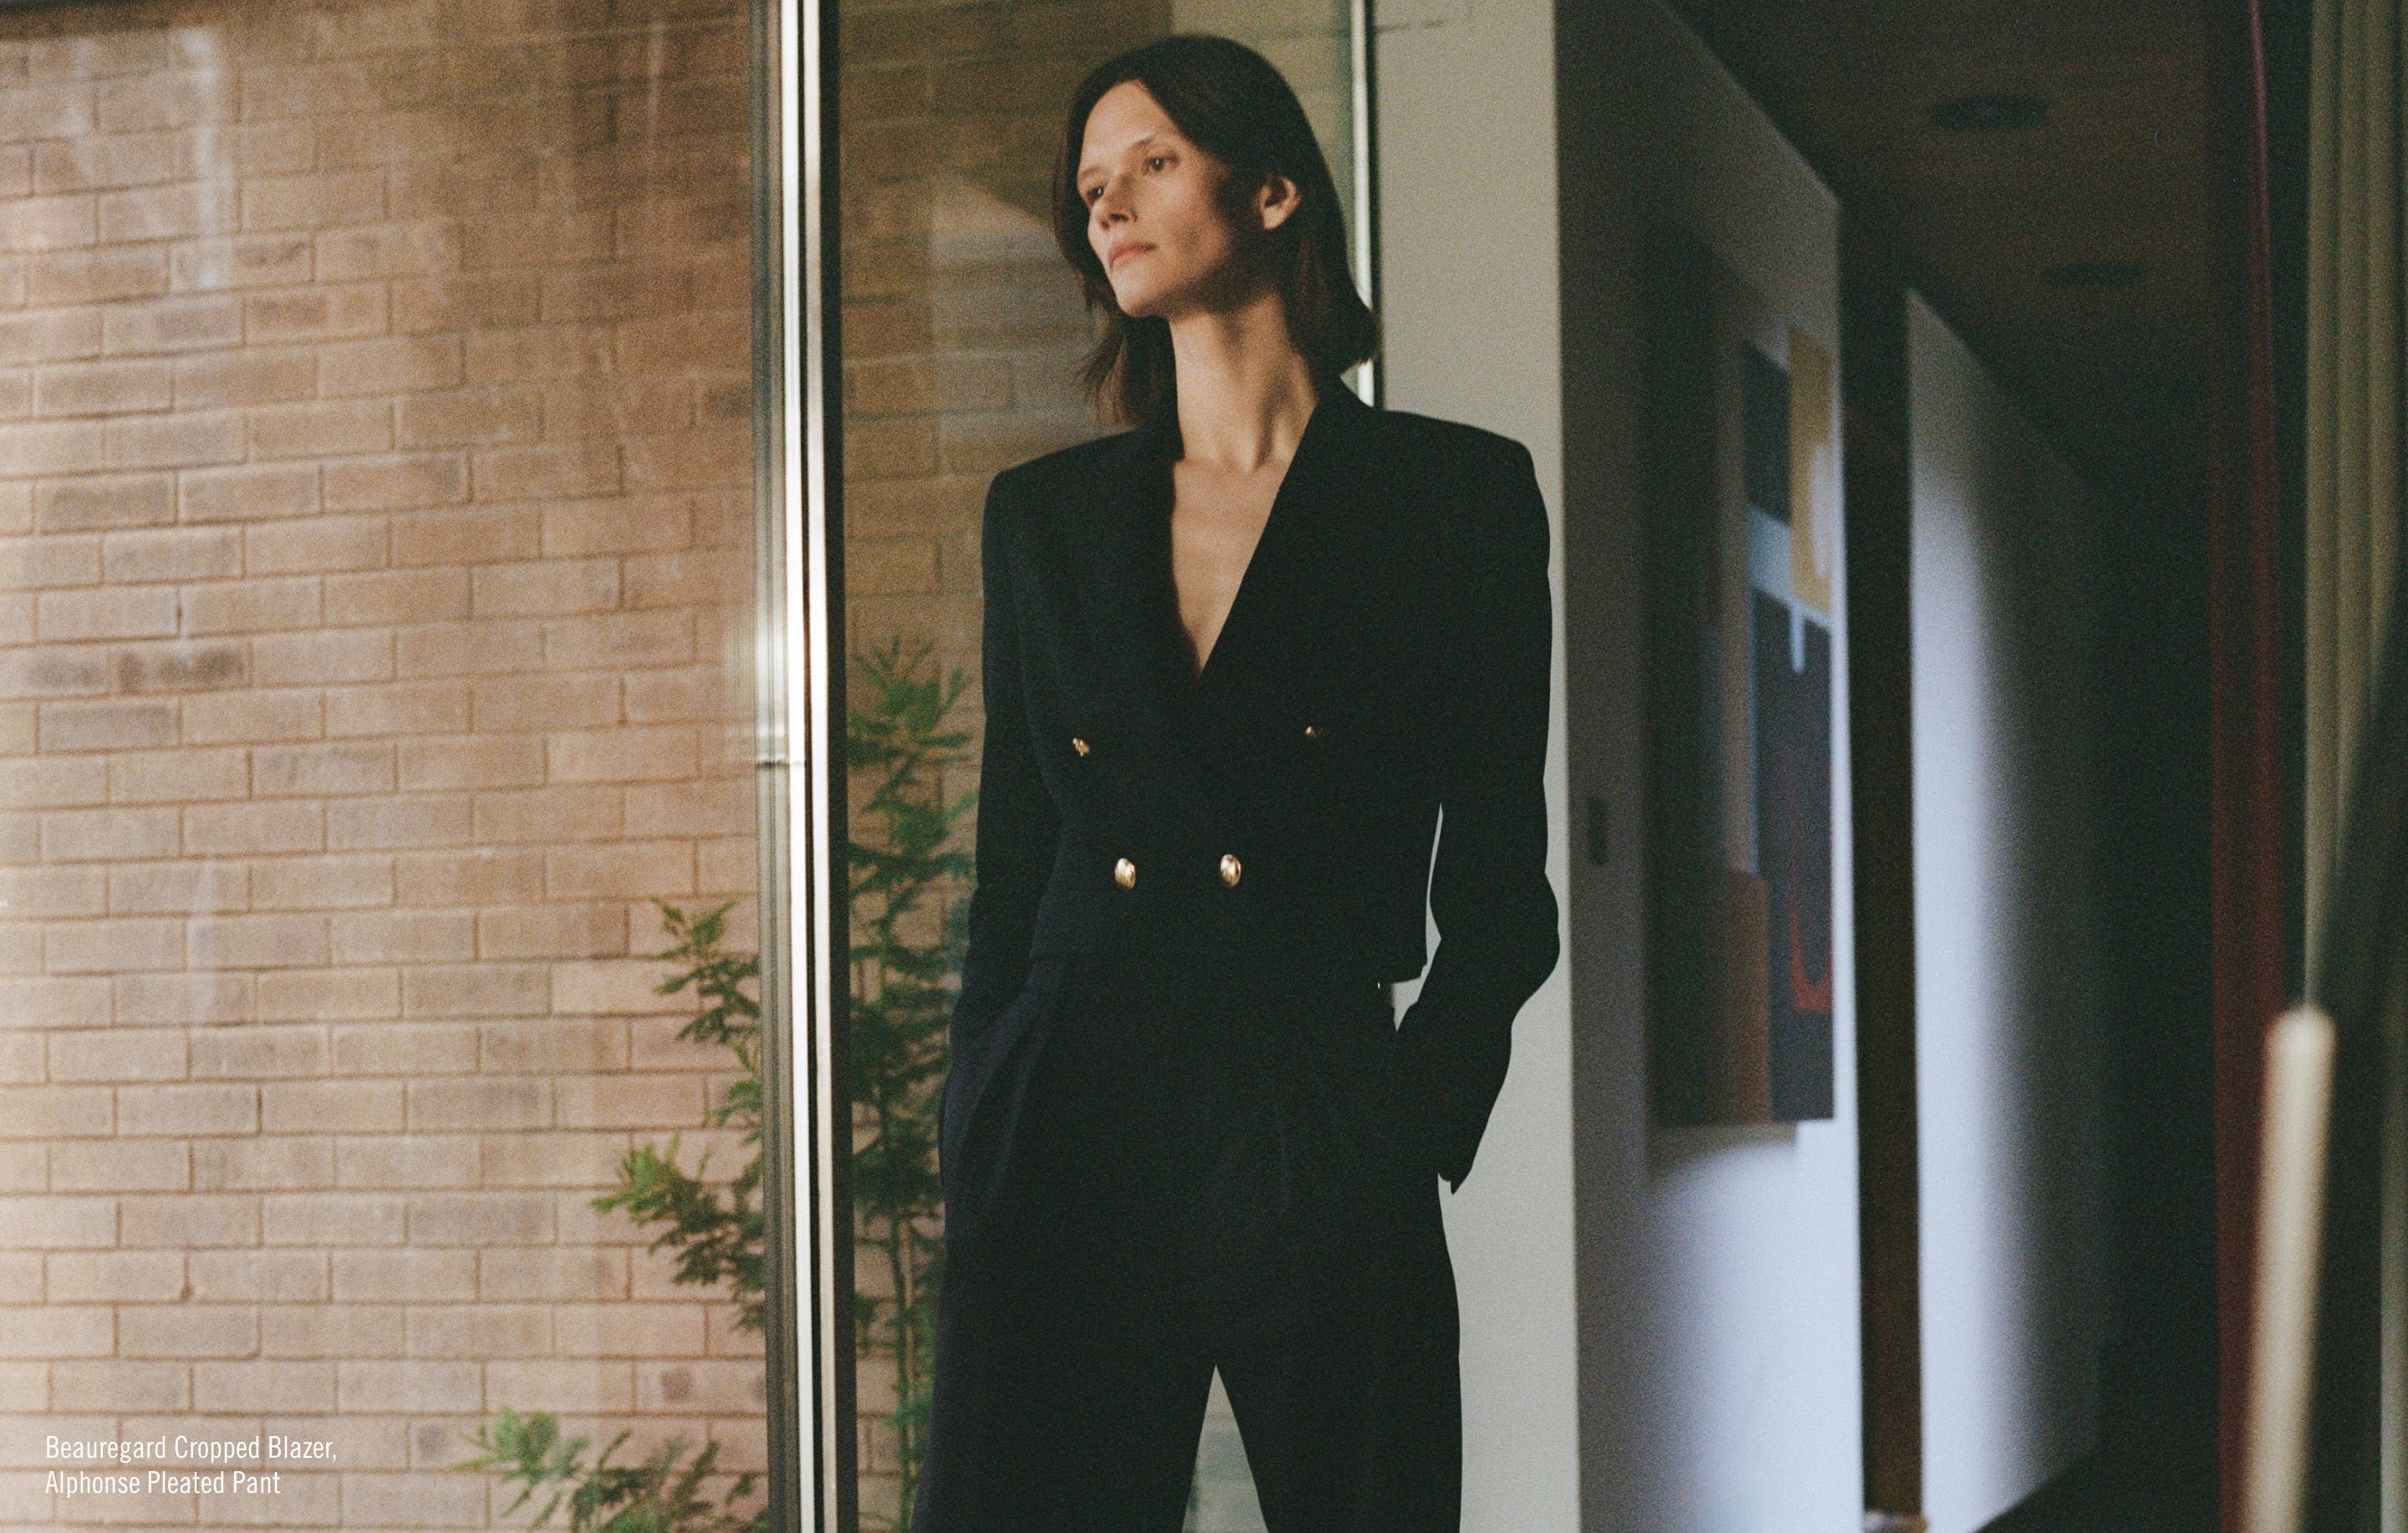 Image of model in black jacket and pants